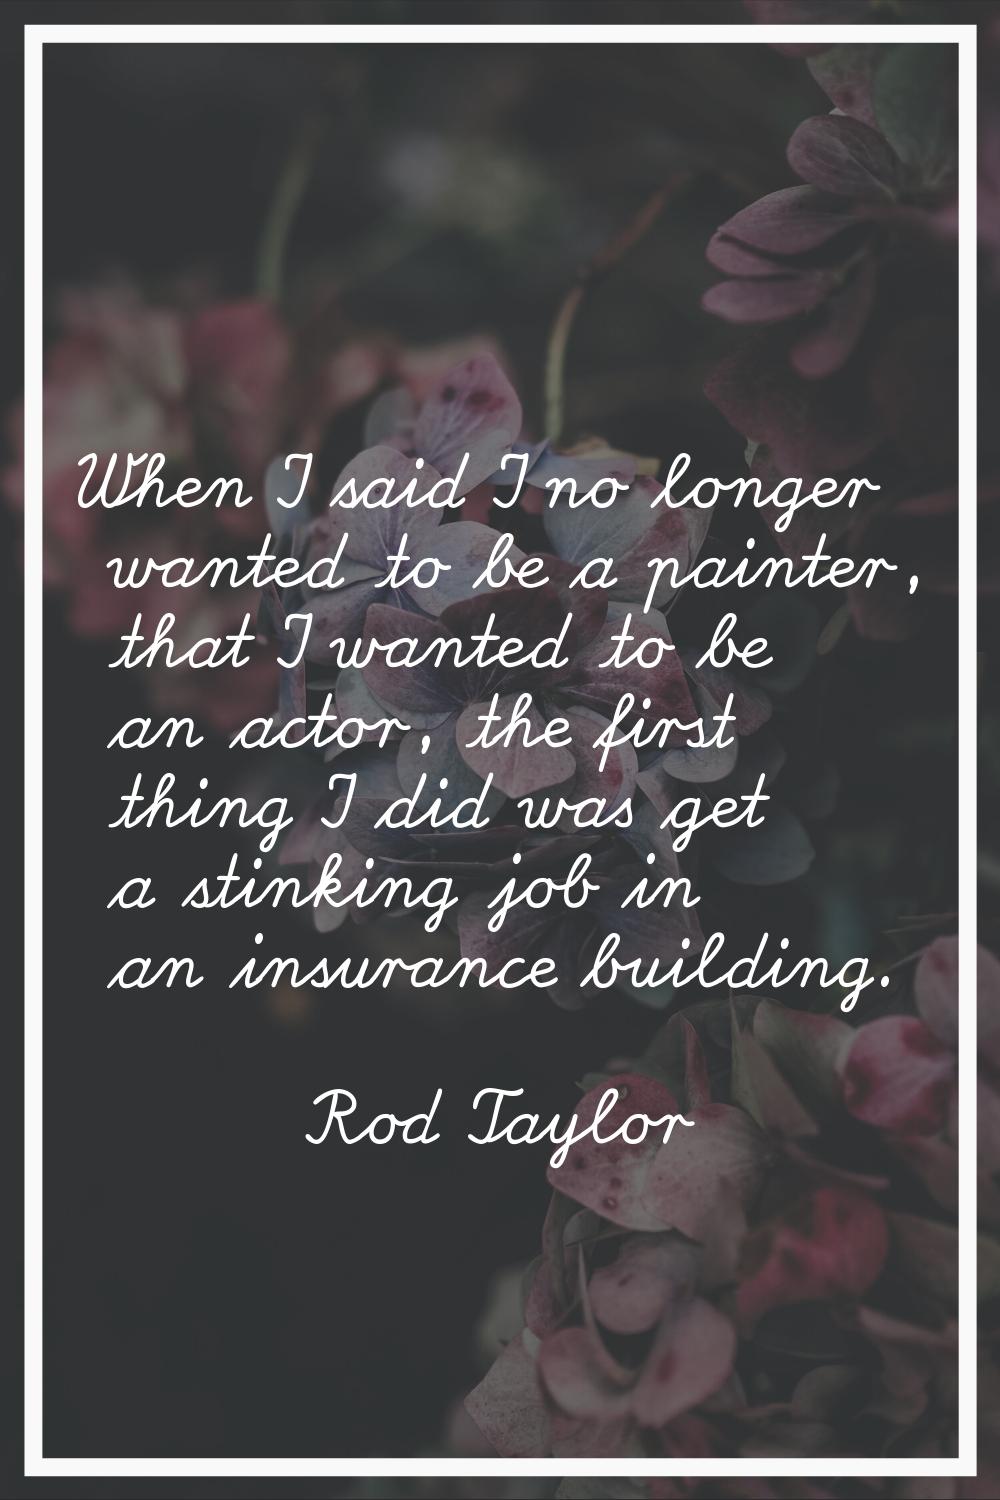 When I said I no longer wanted to be a painter, that I wanted to be an actor, the first thing I did